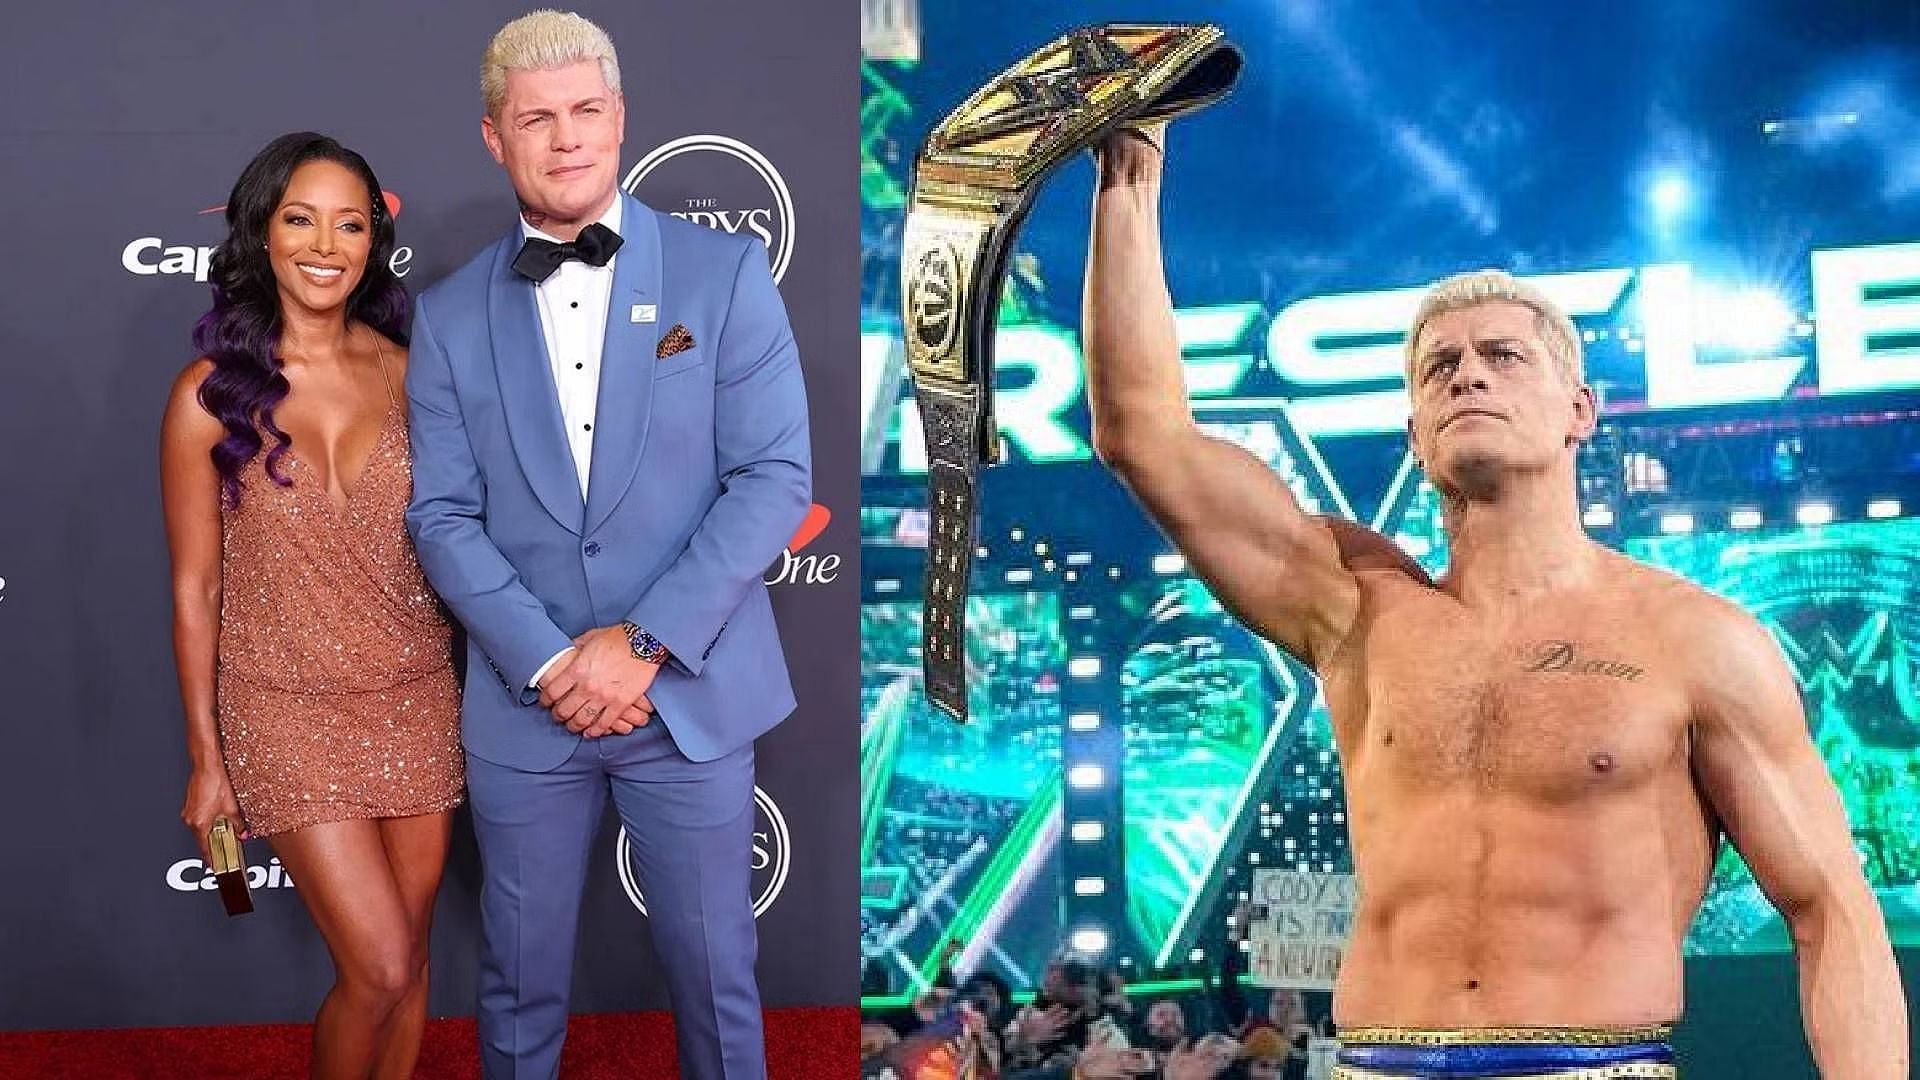 Cody Rhodes is the current Undisputed WWE Universal Champion